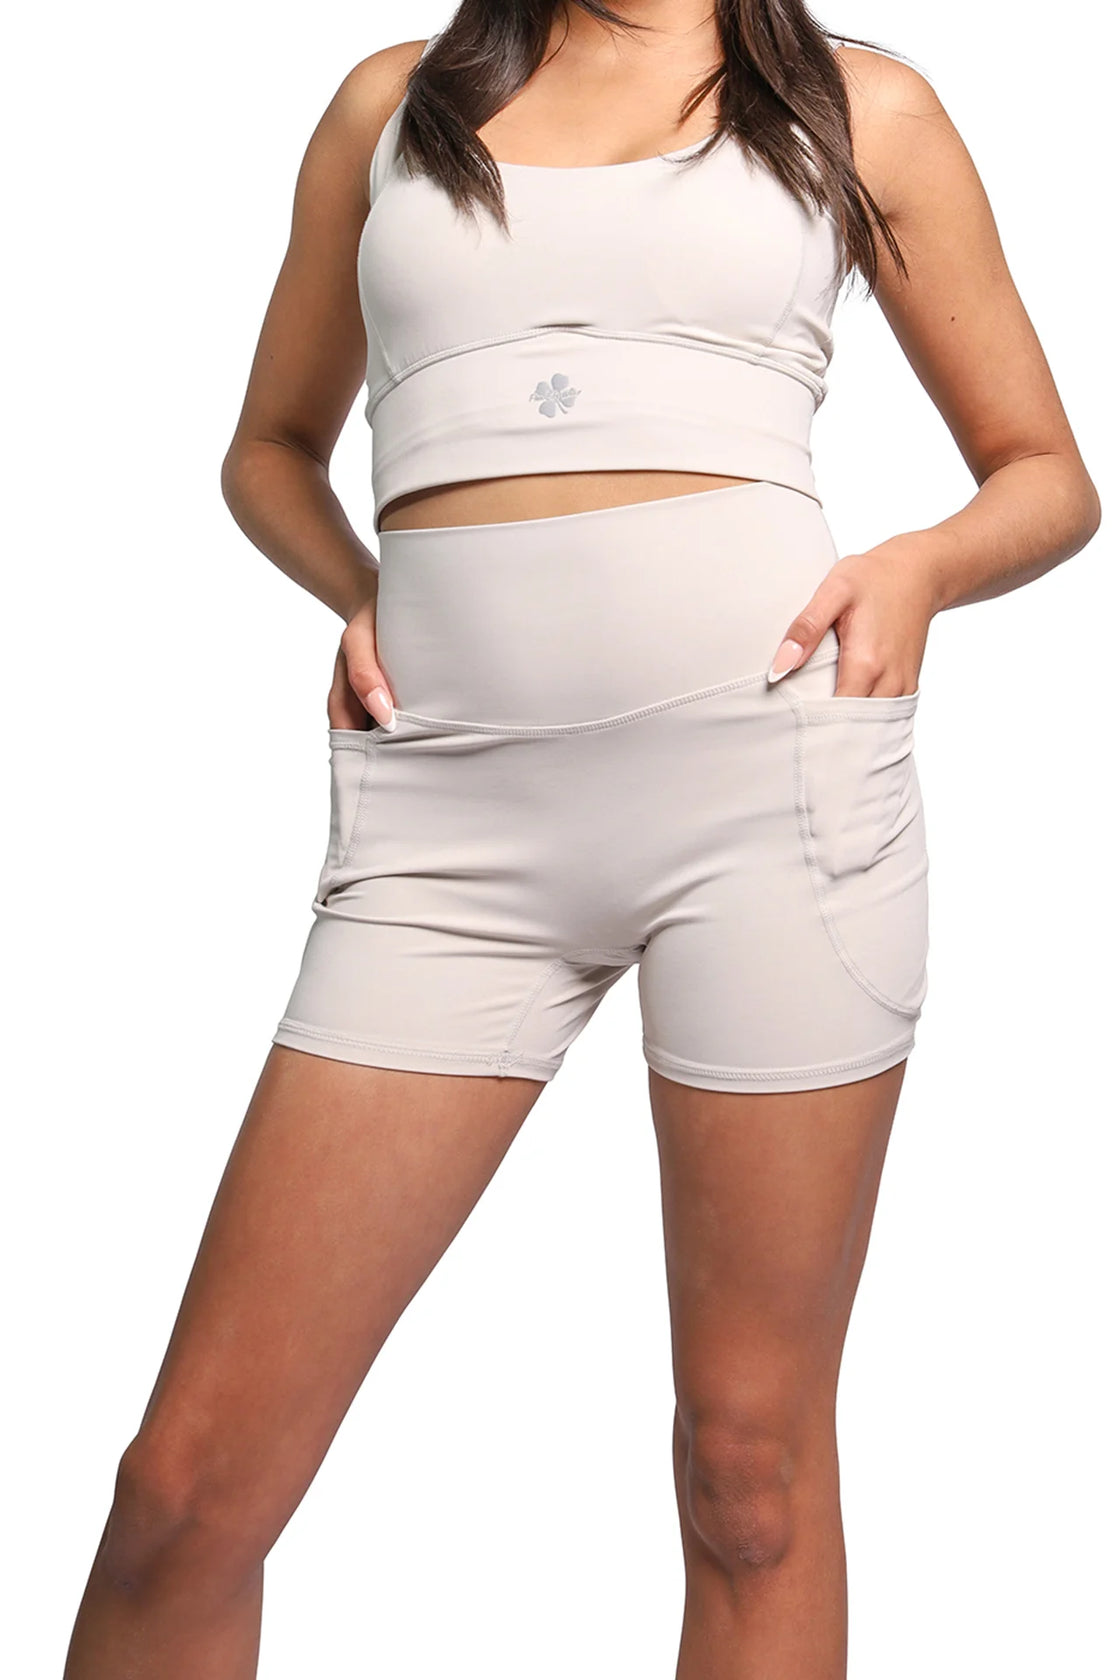 Ivory shorts set for women with bra